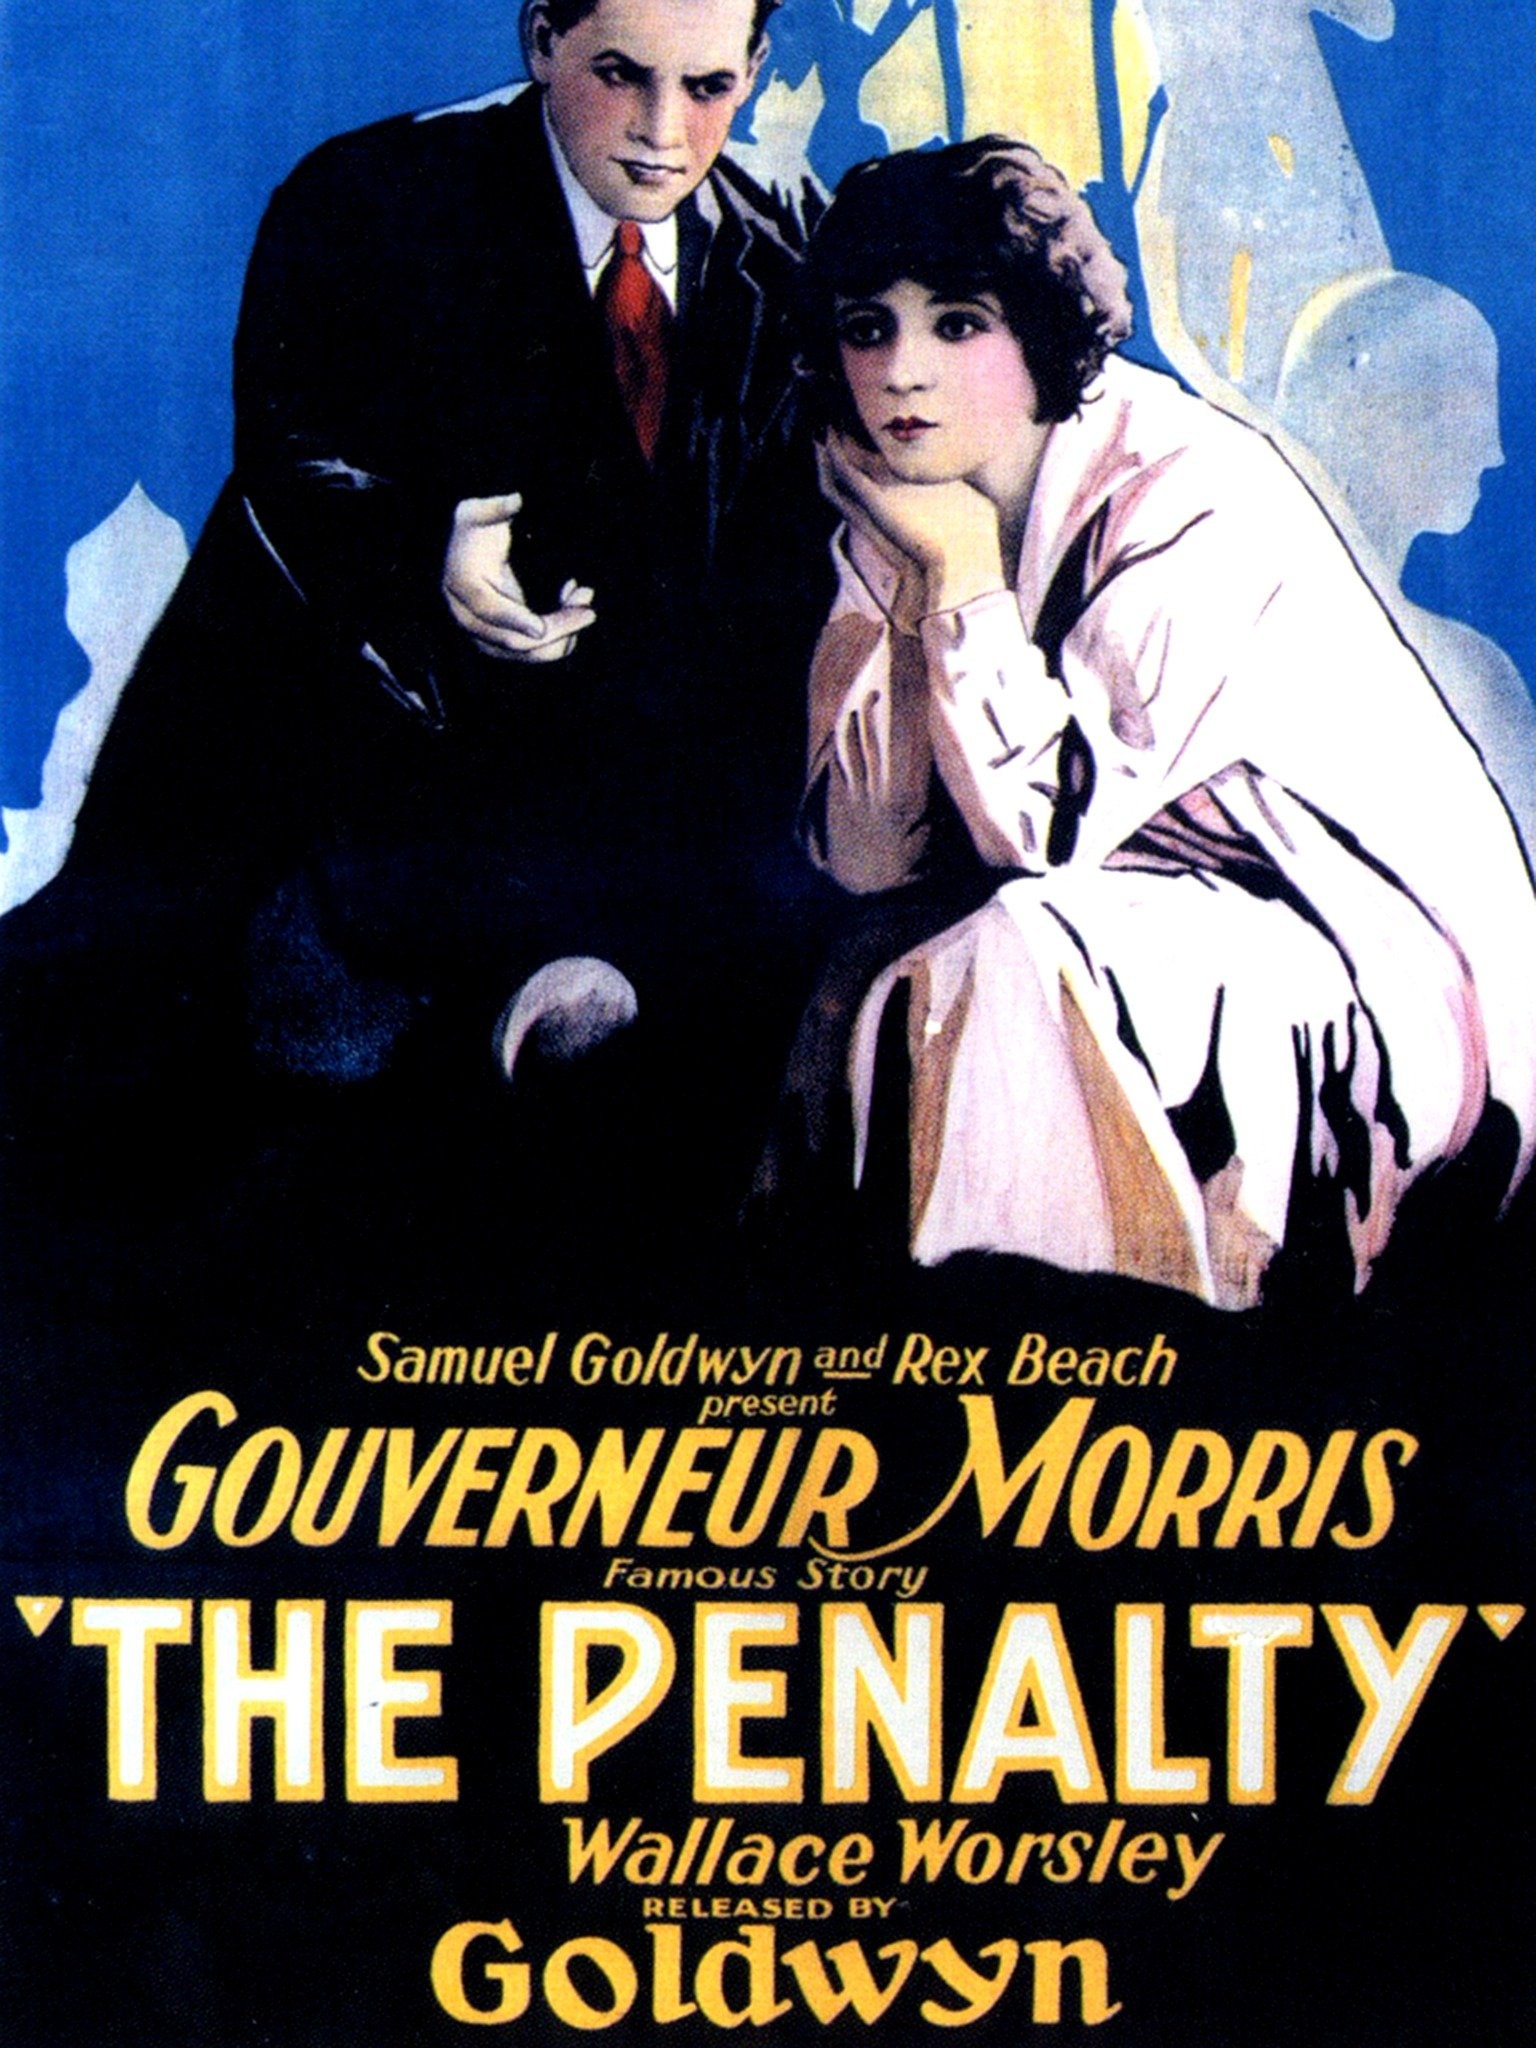 The Penalty Film